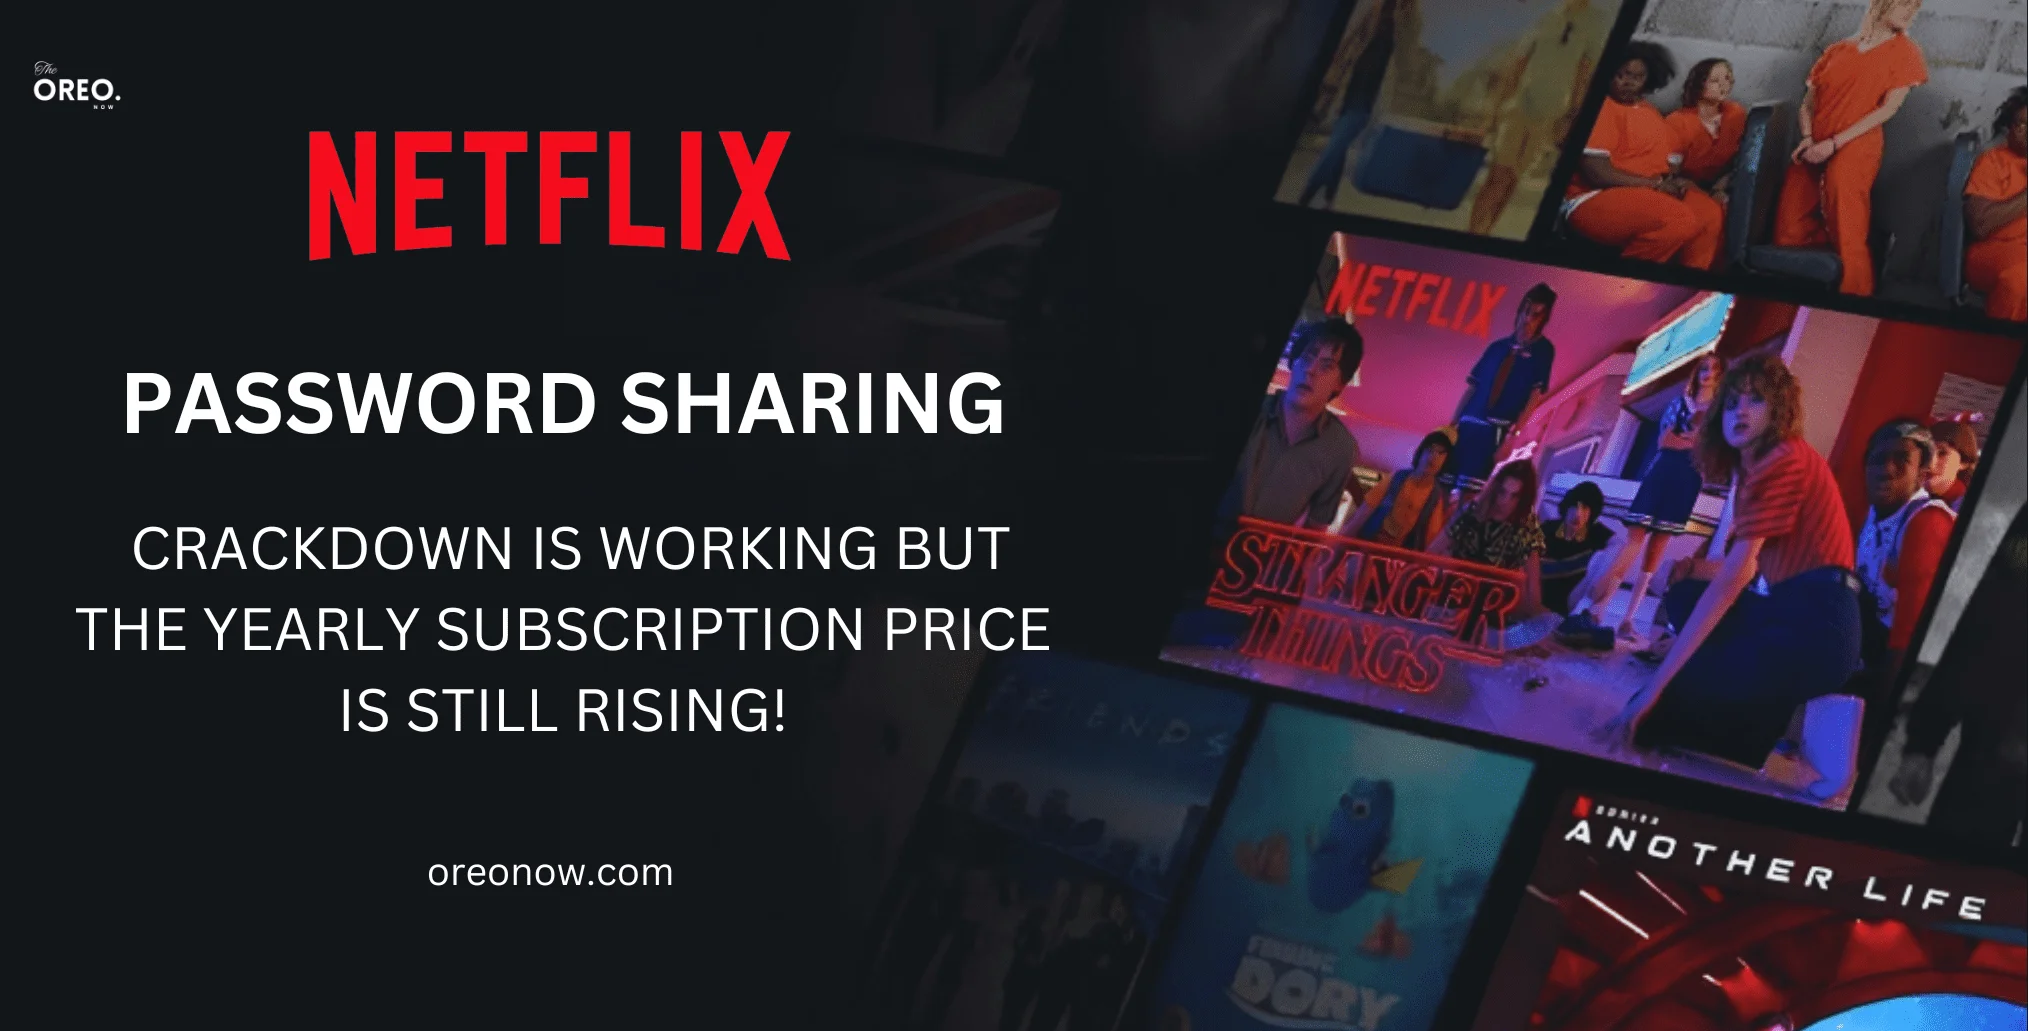 Netflix Password Sharing Crackdown is Working but Price is Rising